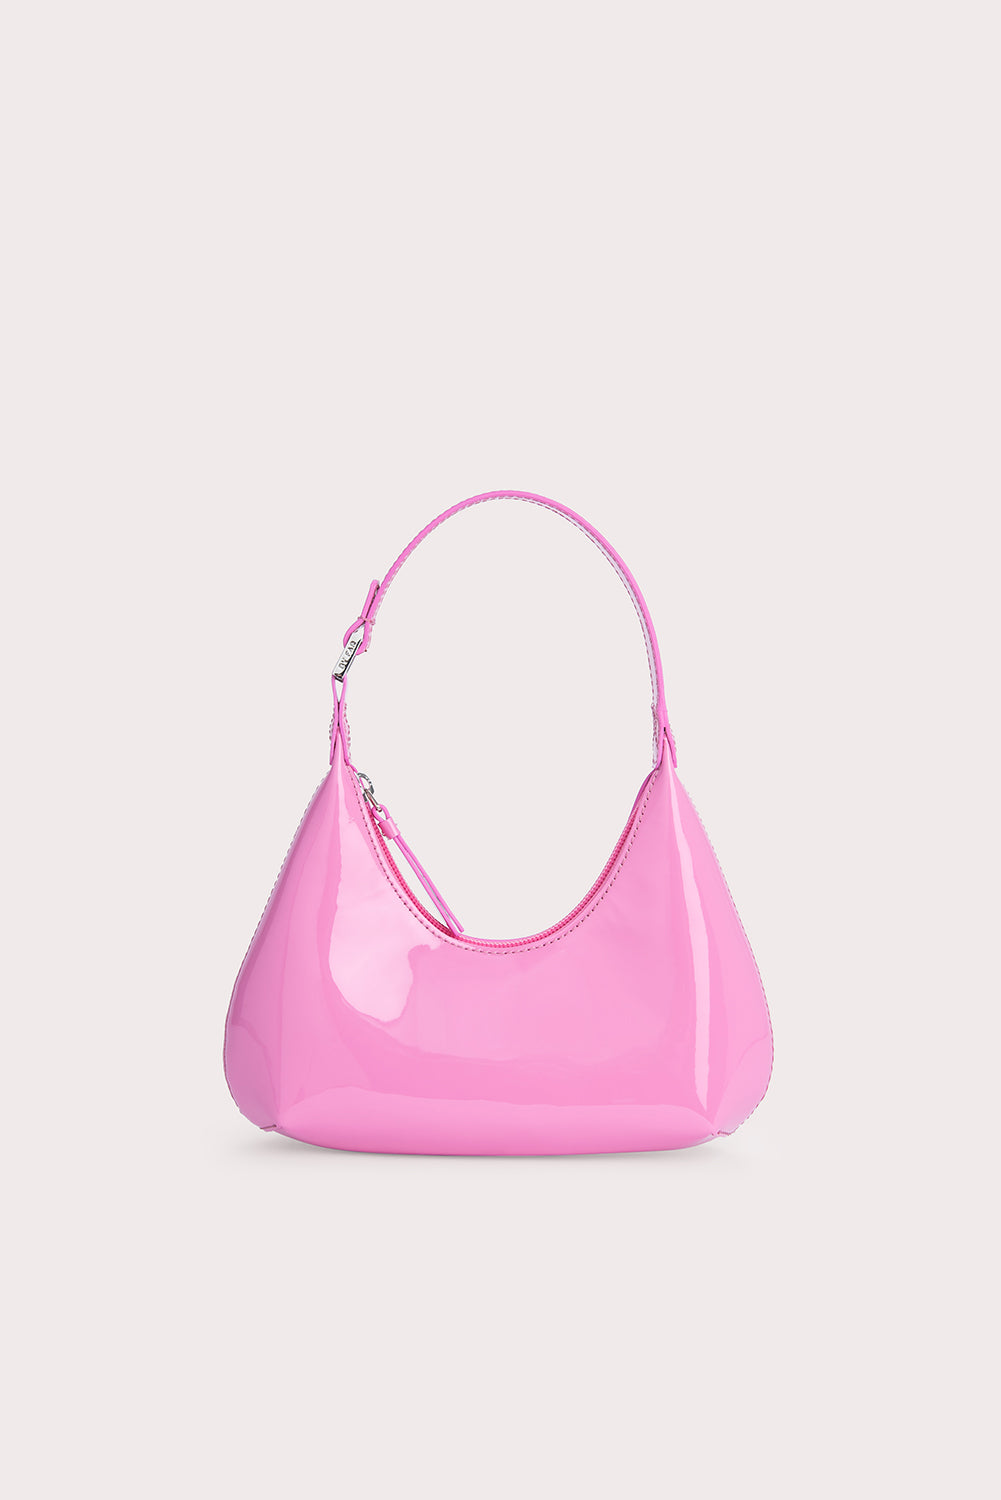 BY FAR Baby Amber Zip-Up Shoulder Bag - ShopStyle